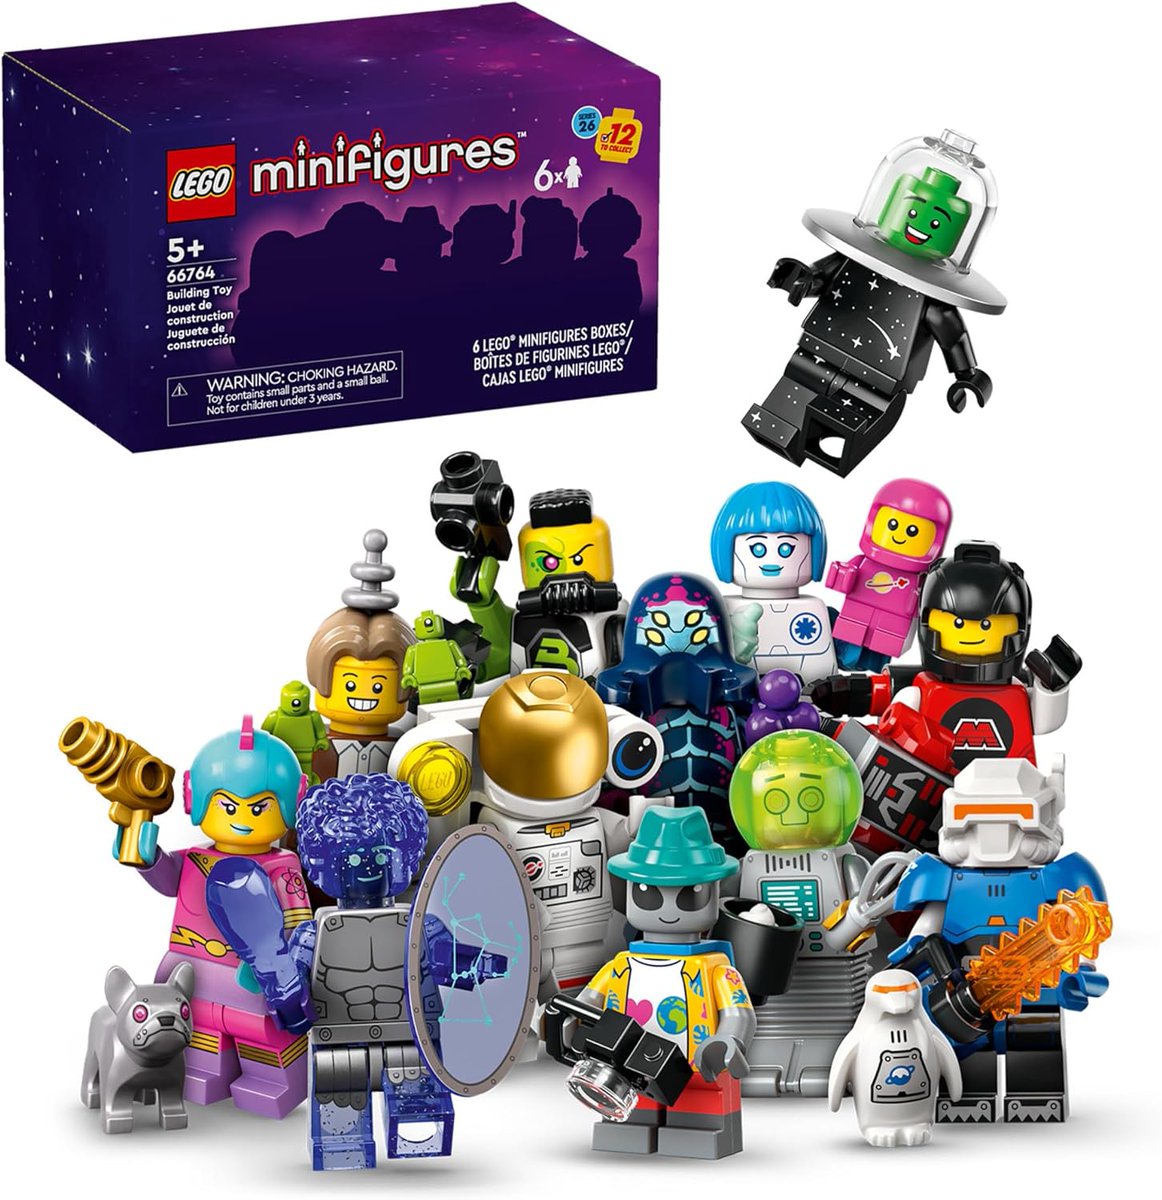 Now live ~ The latest wave of Lego Minifigures are available below at Amazon! This latest set has 12 pieces to find, good luck!
Amzn ~ amzn.to/3UpGPkj
Lego ~ fnkpp.com/LegoIn
#Ad #FPN #FunkoPOPNews #Lego #Minifigs